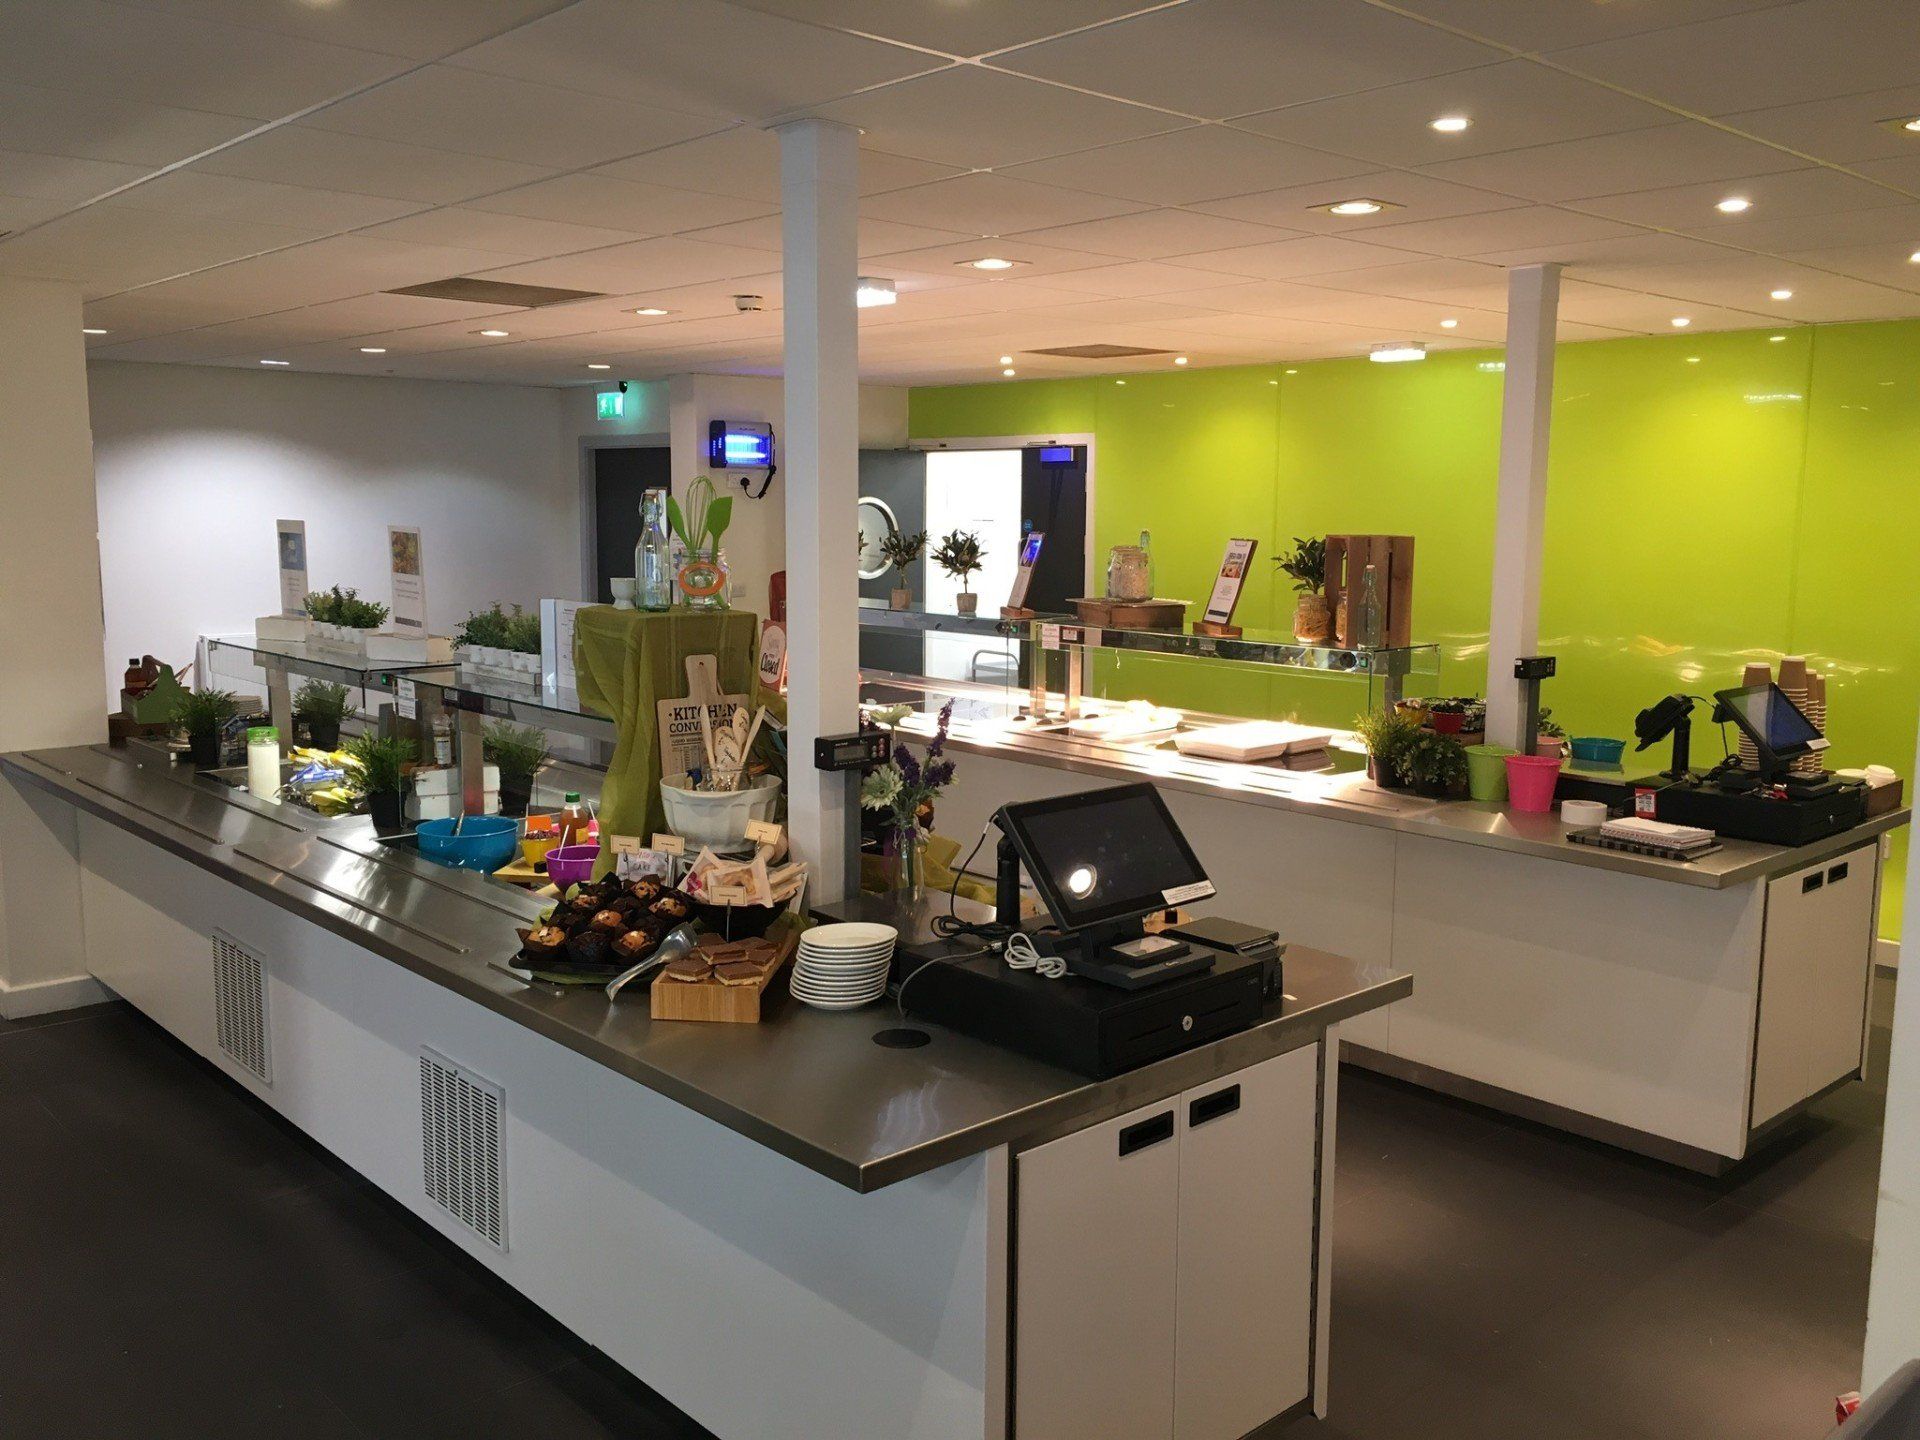 the staff restaurant at the Siemens Gamesa factory in Hull